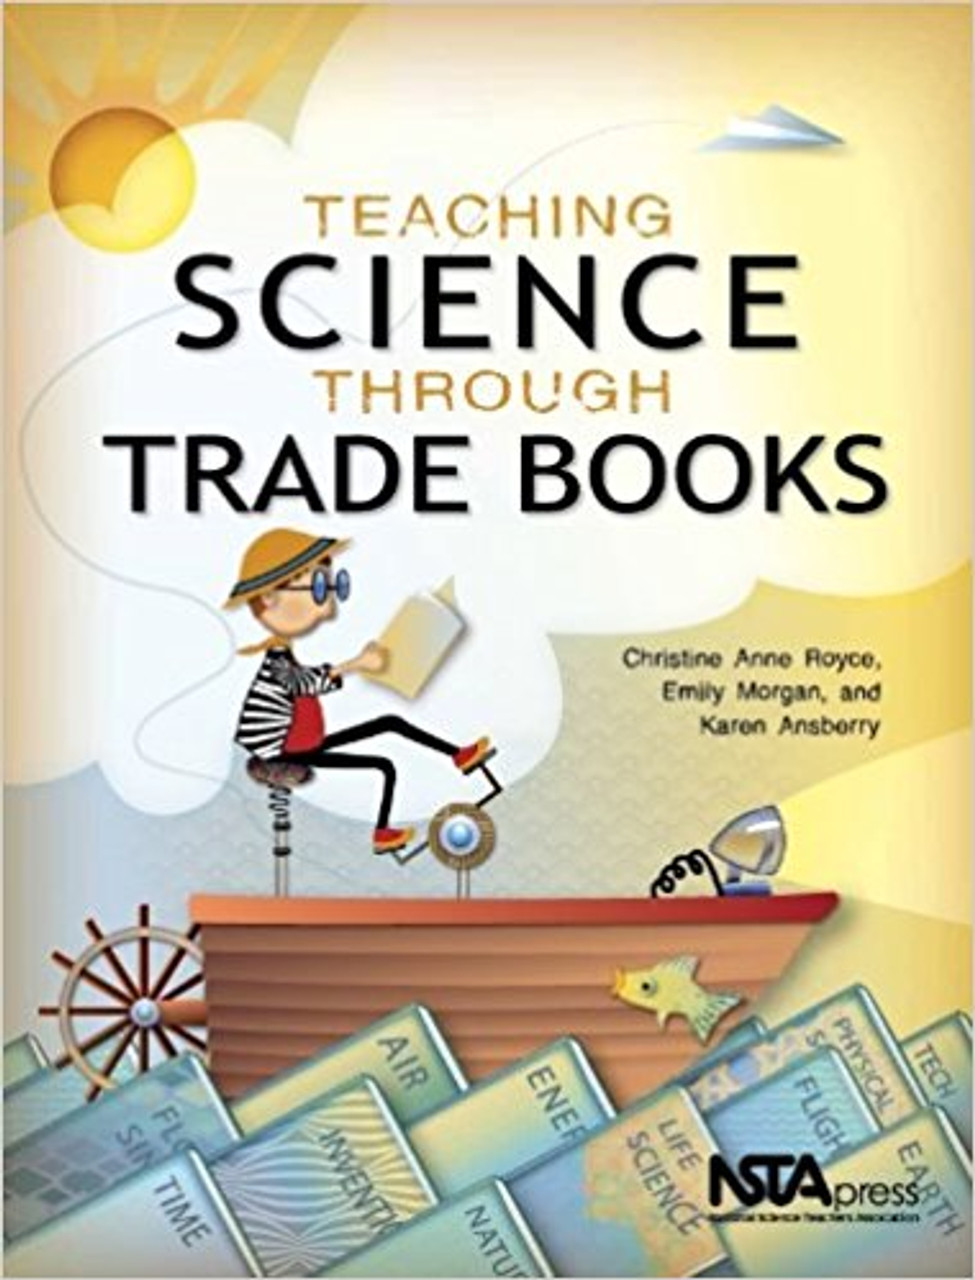 Teaching Science Through Trade Books by Christine Anne Royce